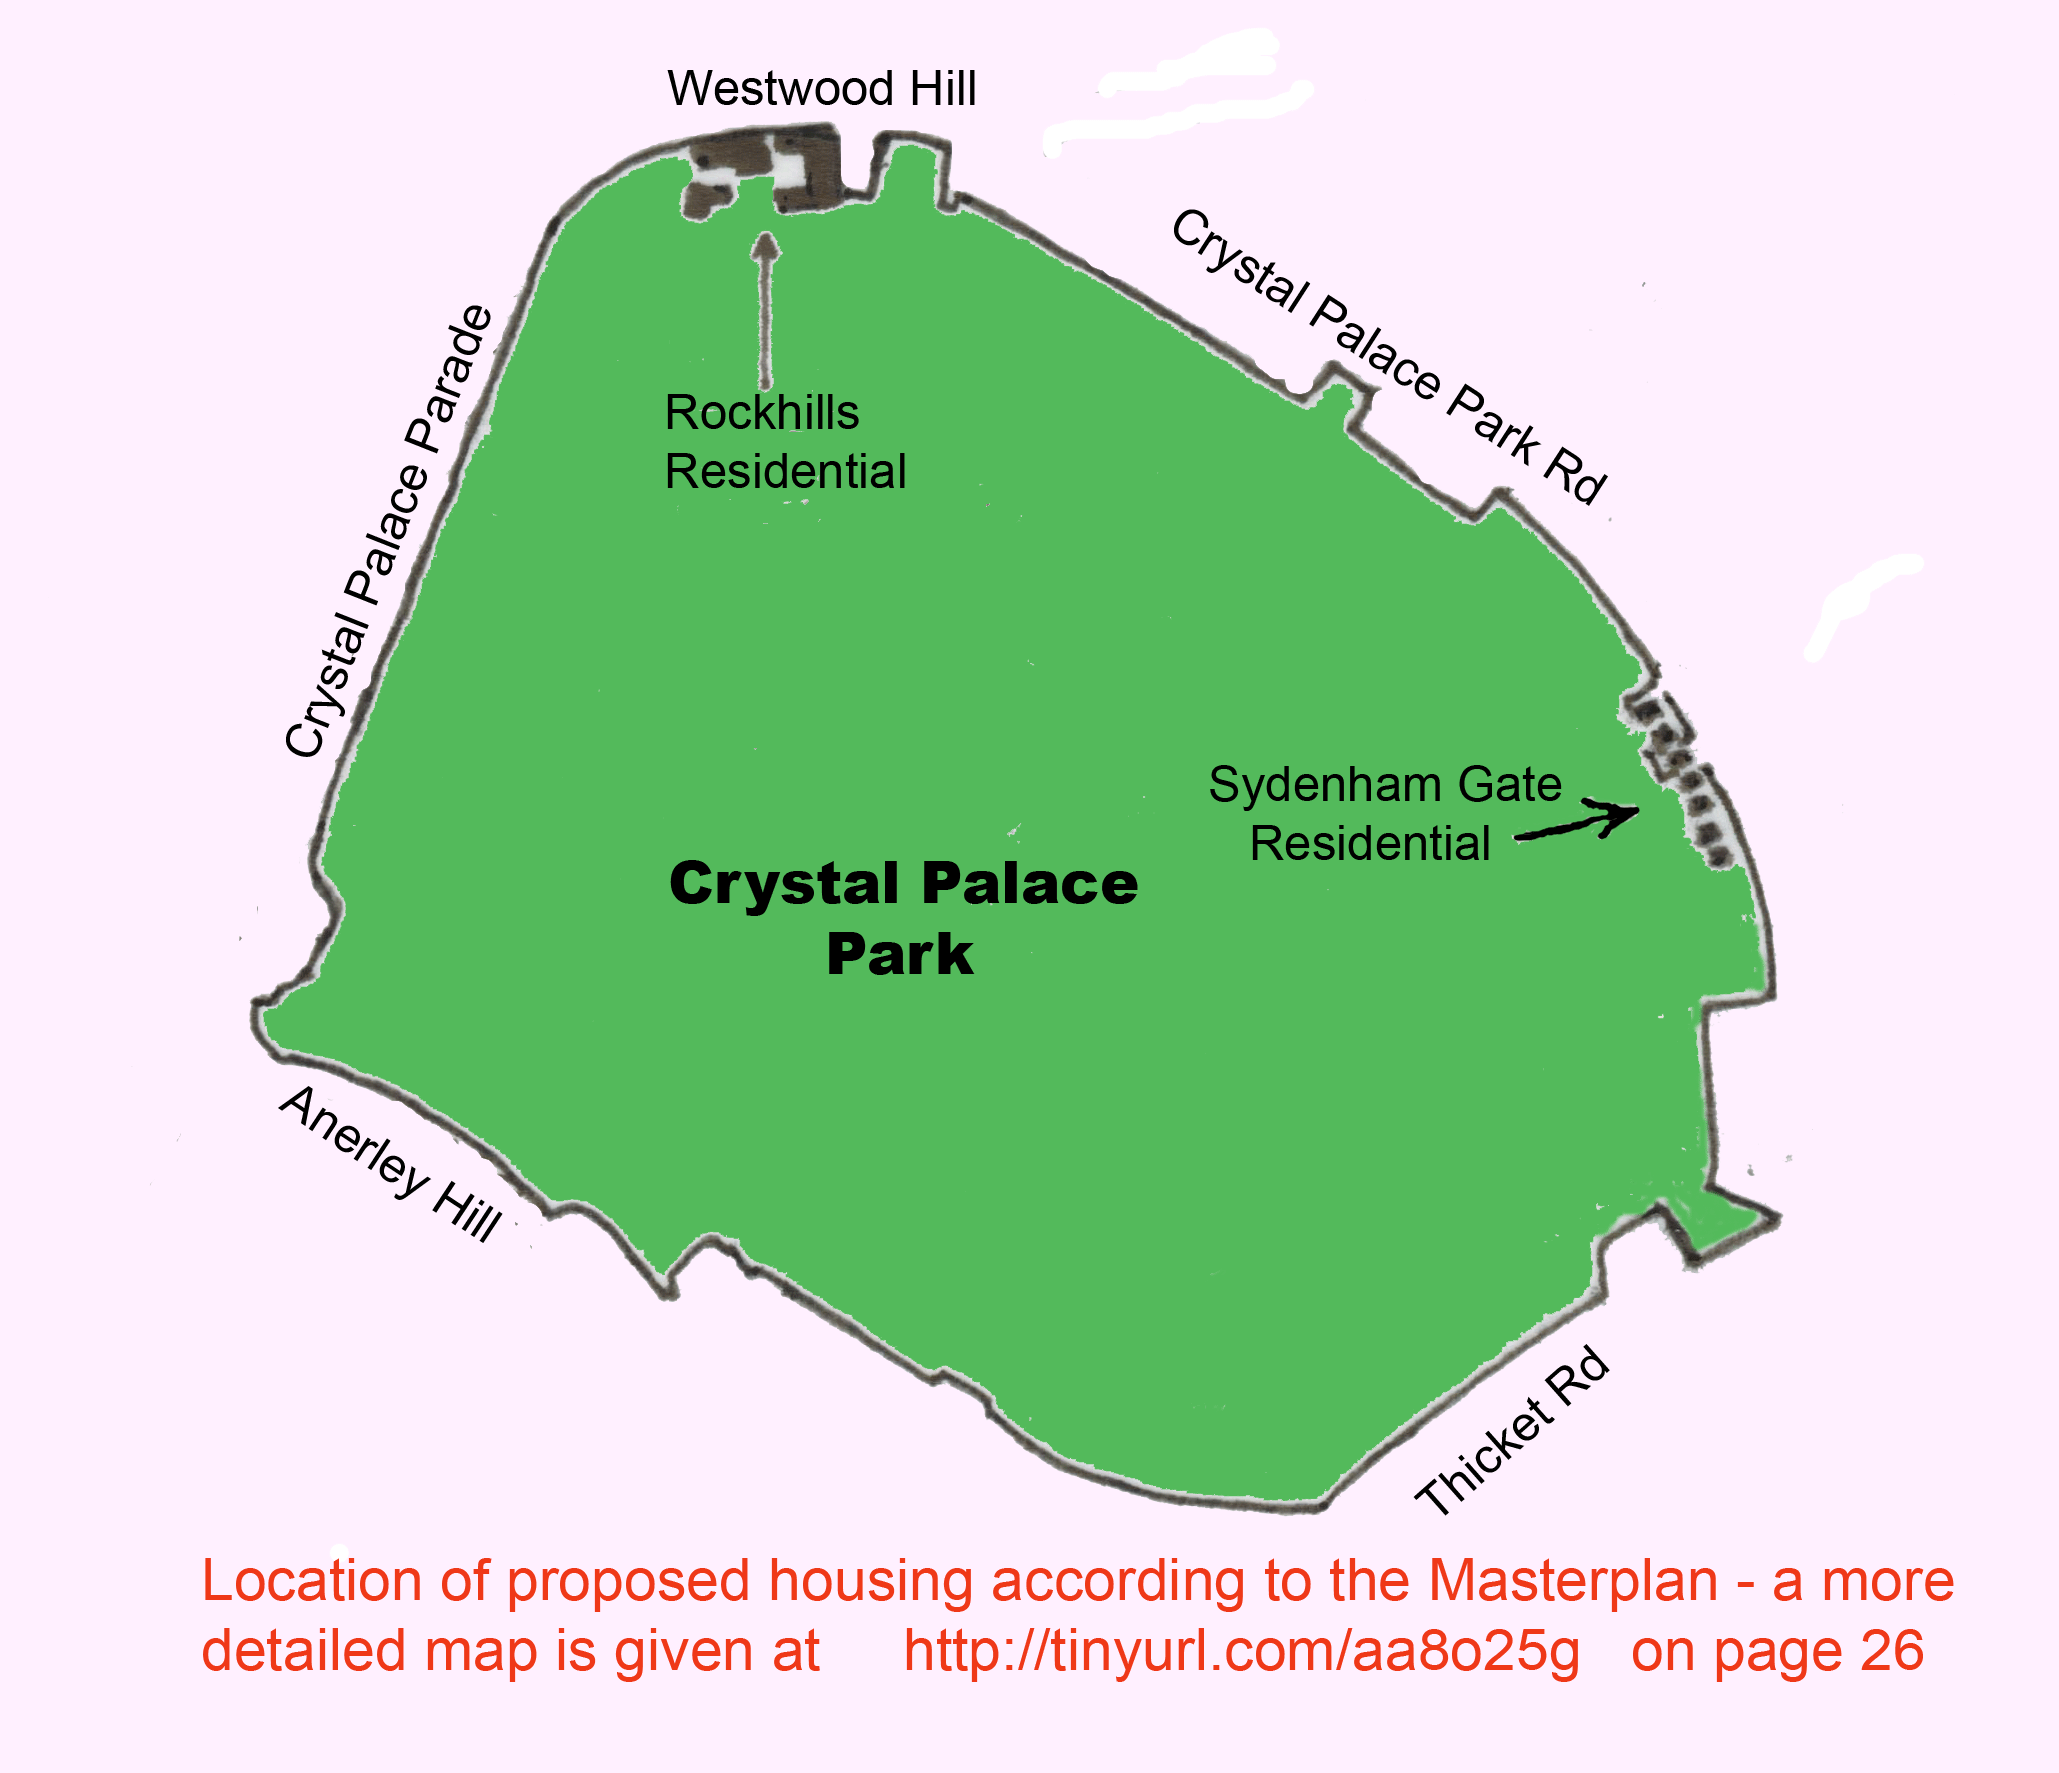 The Masterplan and Housing in the Park